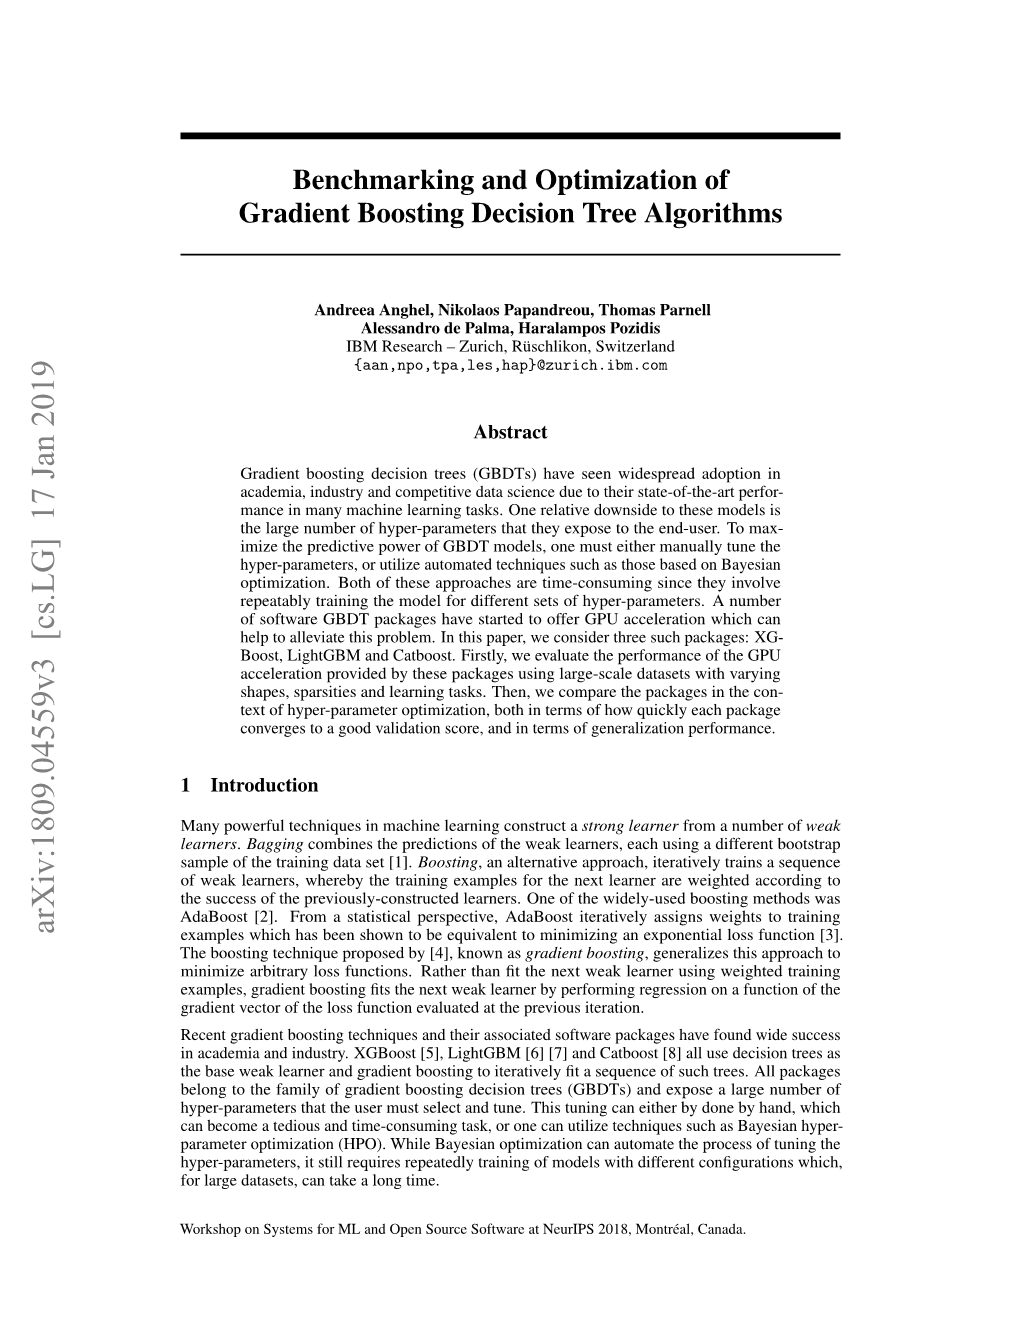 Benchmarking and Optimization of Gradient Boosting Decision Tree Algorithms